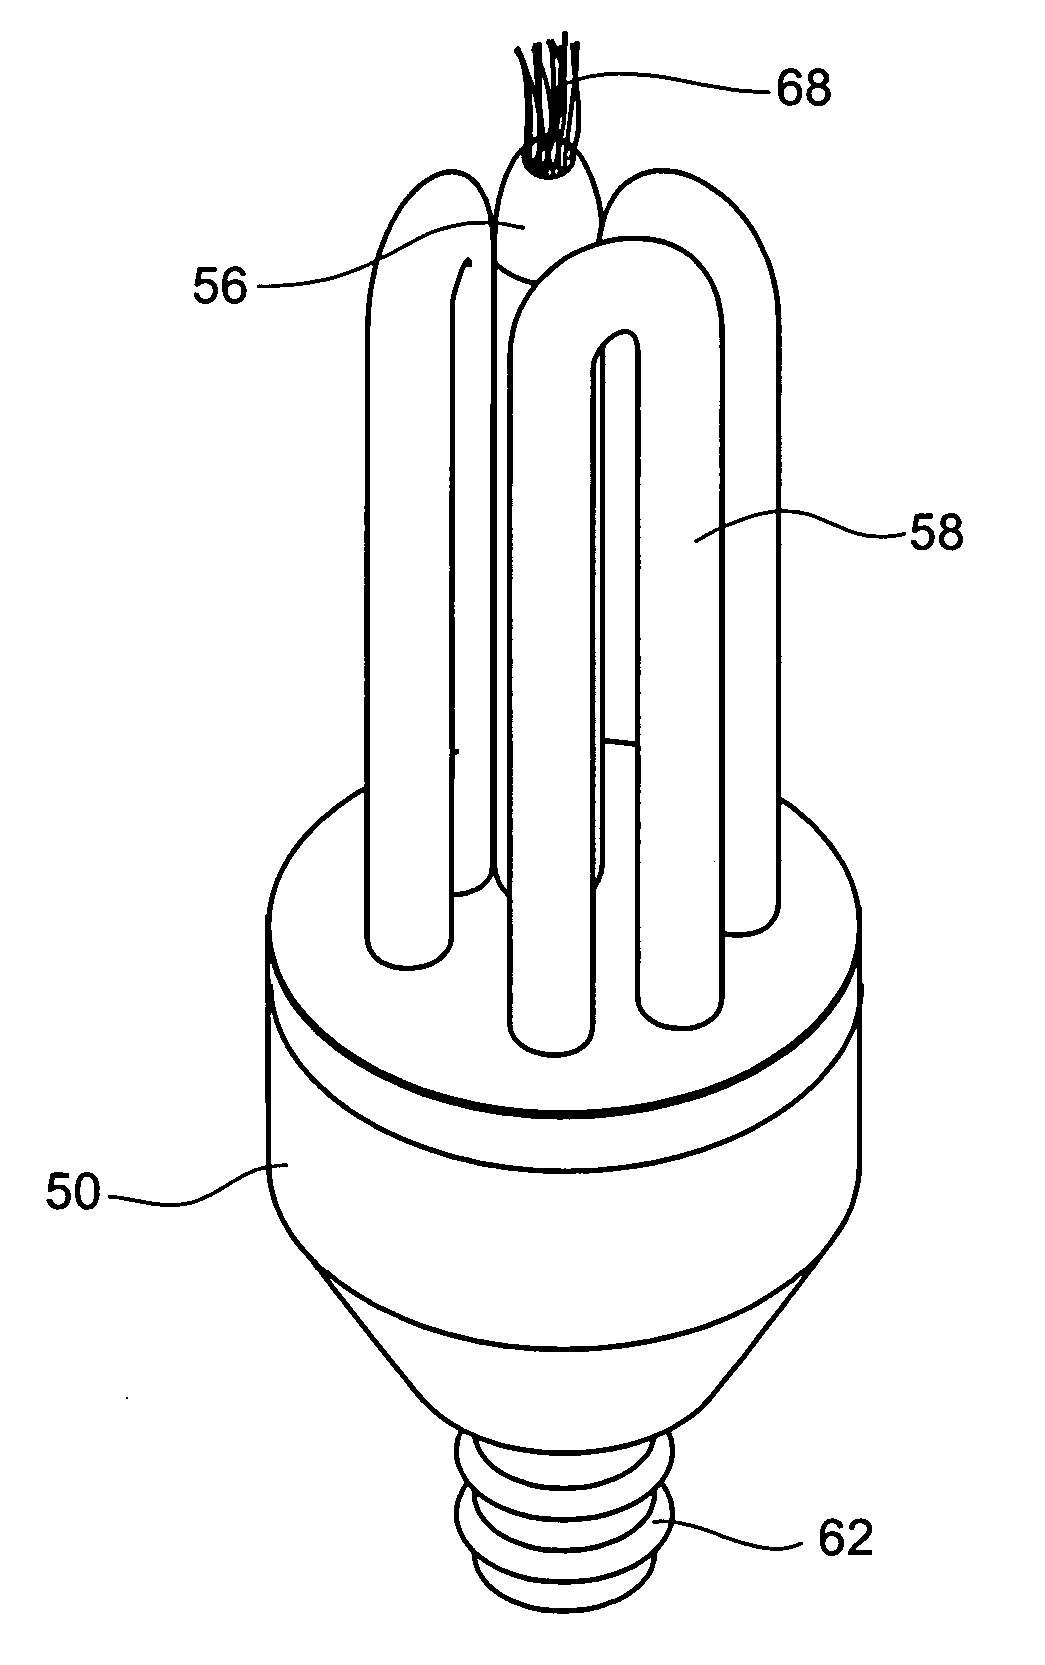 Anion generator for incorporation into lighting apparatuses and other appliances